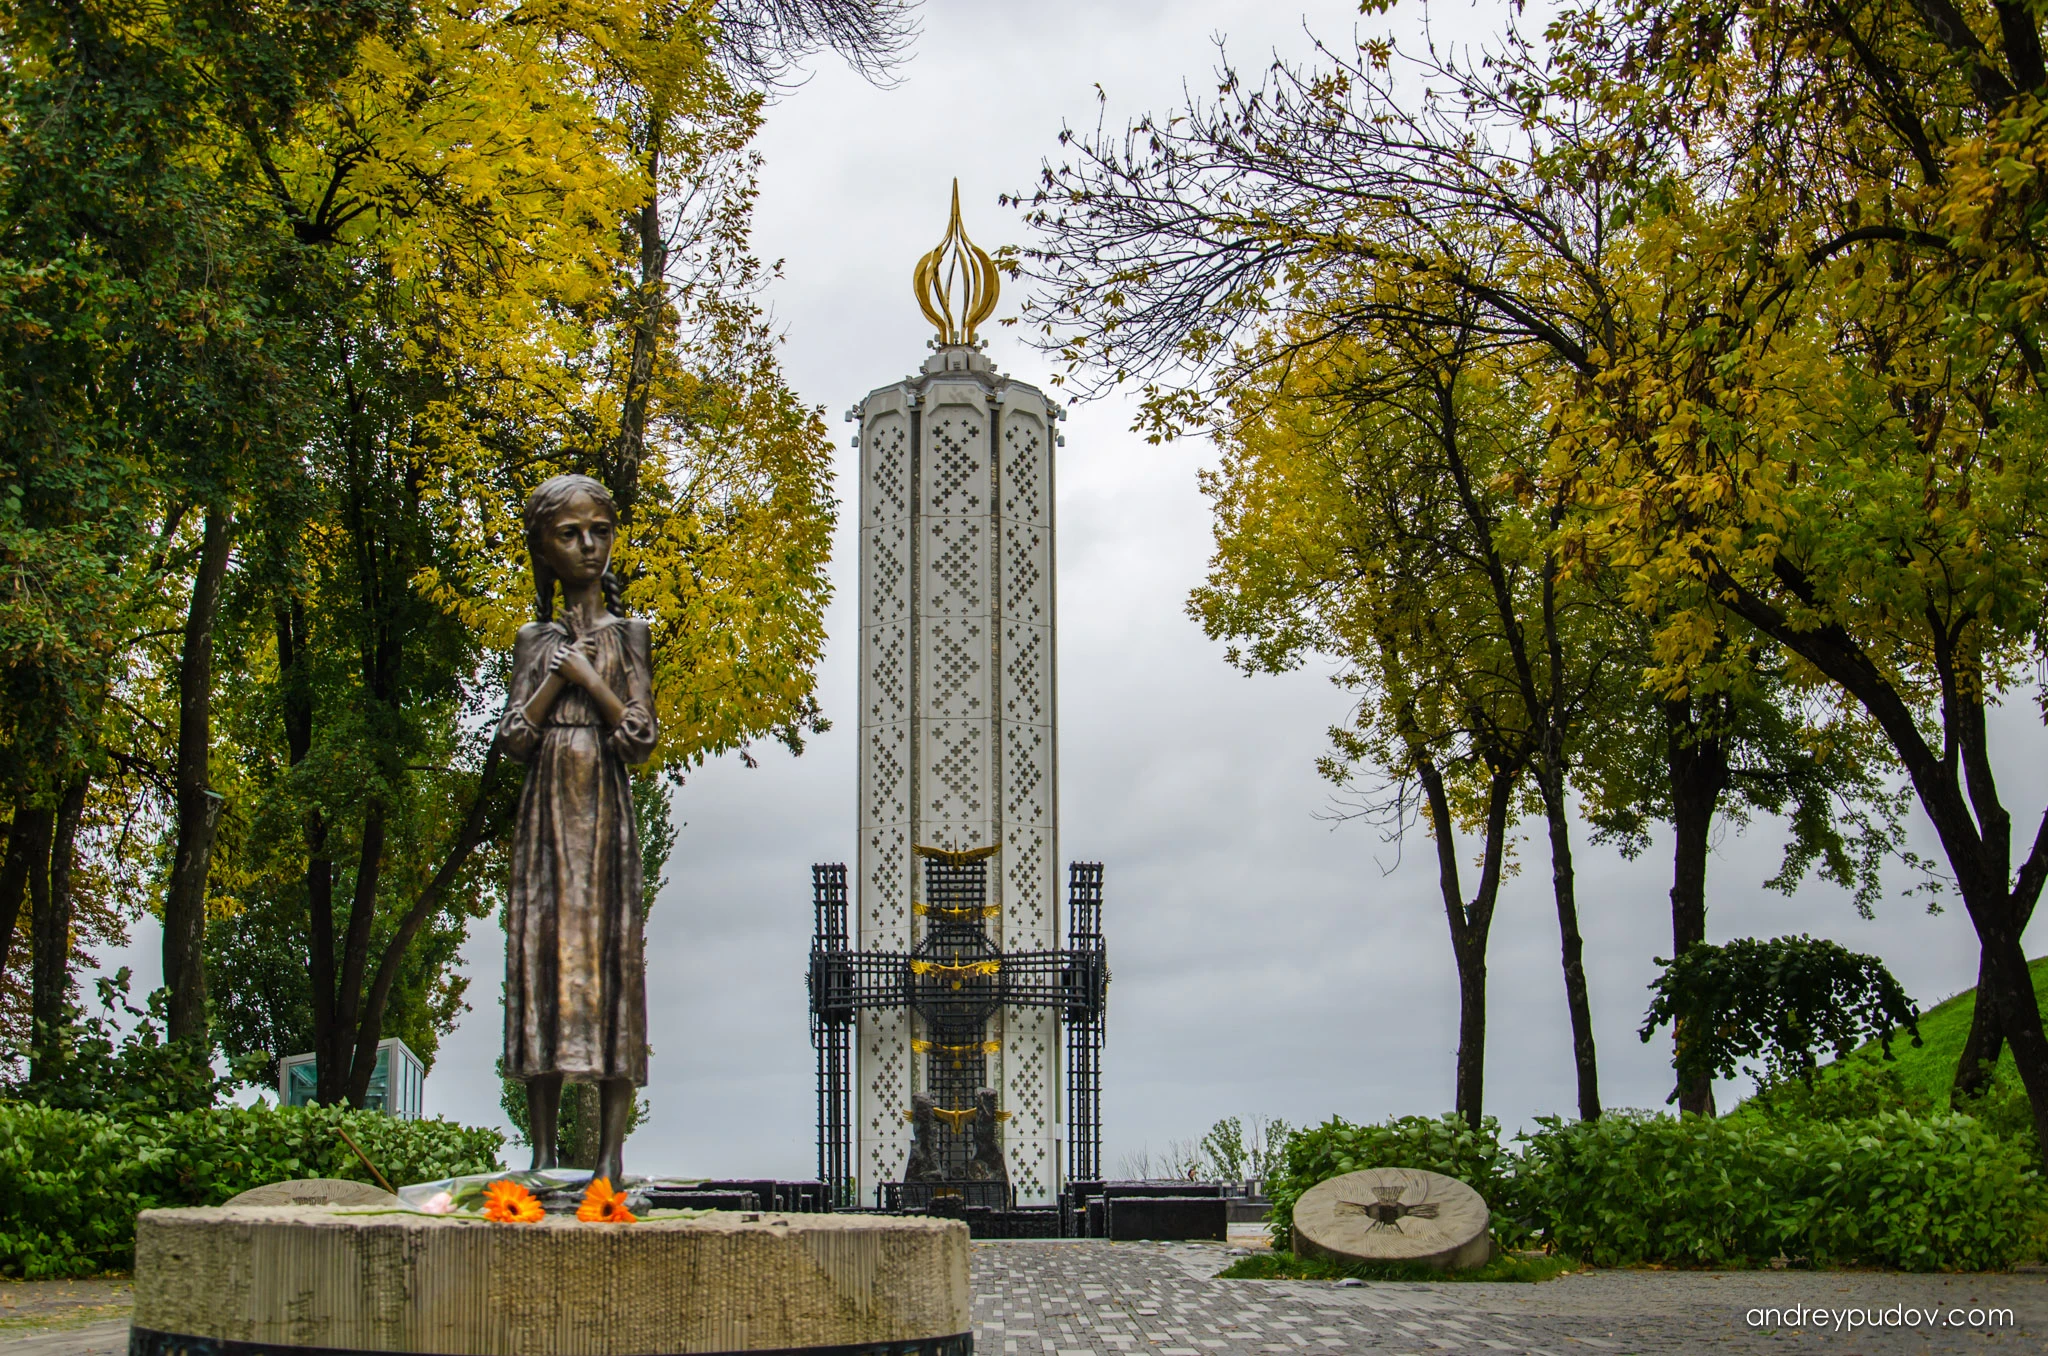 Memorial to the victims of the Holodomor. The Holodomor also known as the Terror-Famine and sometimes referred to as the Great Famine, was a famine in Soviet Ukraine from 1932 to 1933 that killed millions of Ukrainians. As part of the wider Soviet famine of 1932–1933 which affected the major grain-producing areas of the country, millions of inhabitants of Ukraine died of starvation in a peacetime catastrophe unprecedented in the history of Ukraine. Since 2006, the Holodomor has been recognized by Ukraine and 15 other countries as a genocide of the Ukrainian people carried out by the Soviet government.